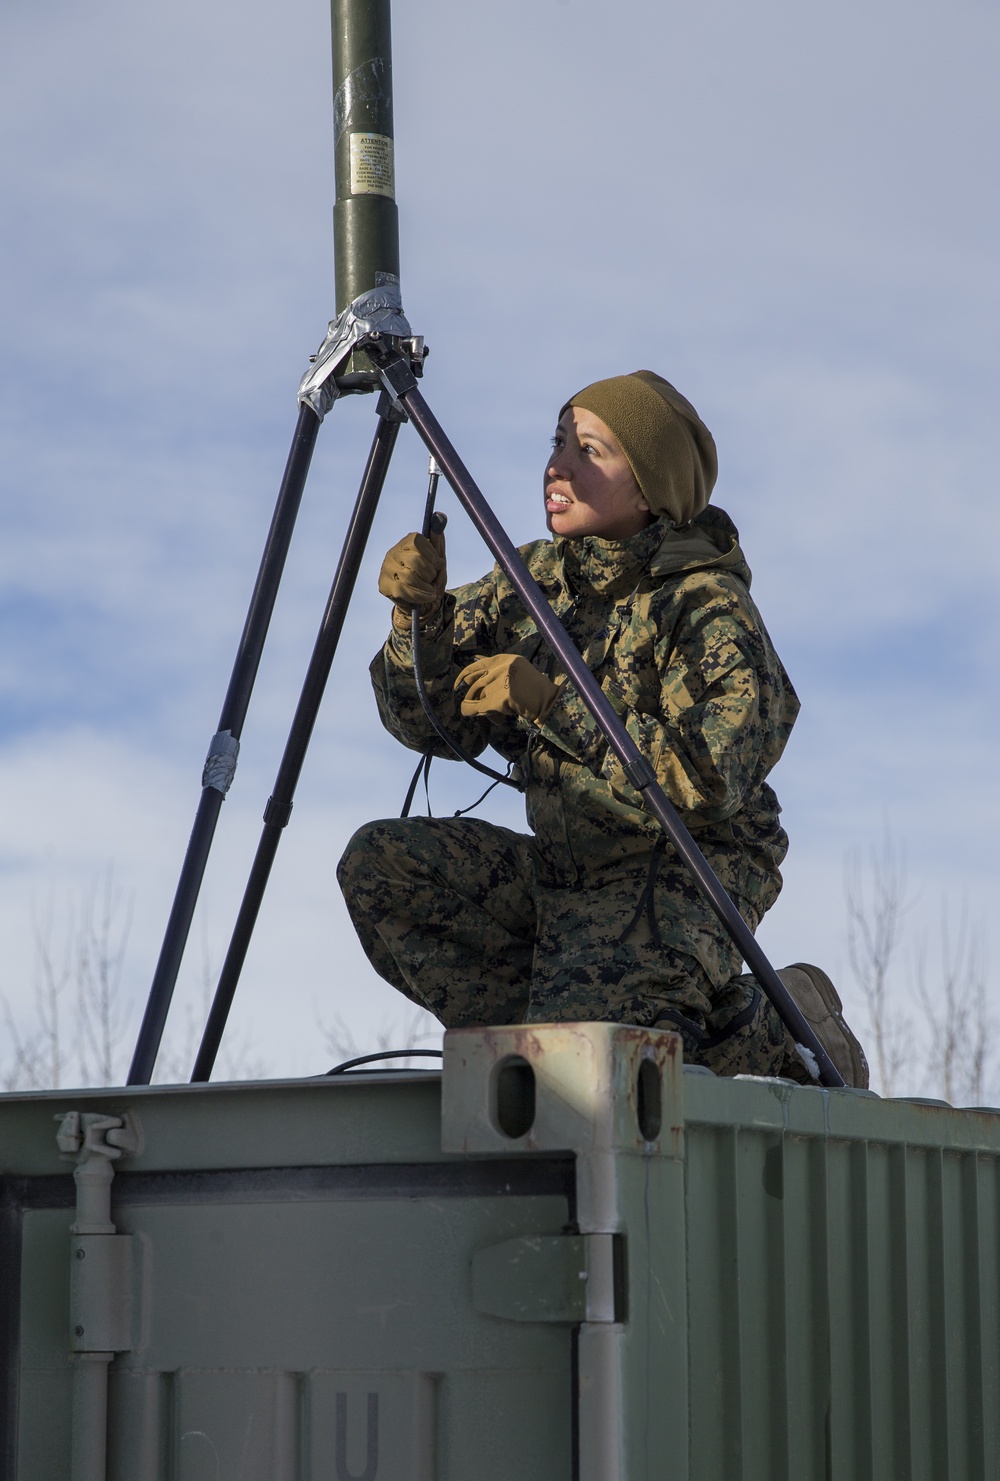 DVIDS - Images - Task Force Arctic Edge [Image 6 of 7]